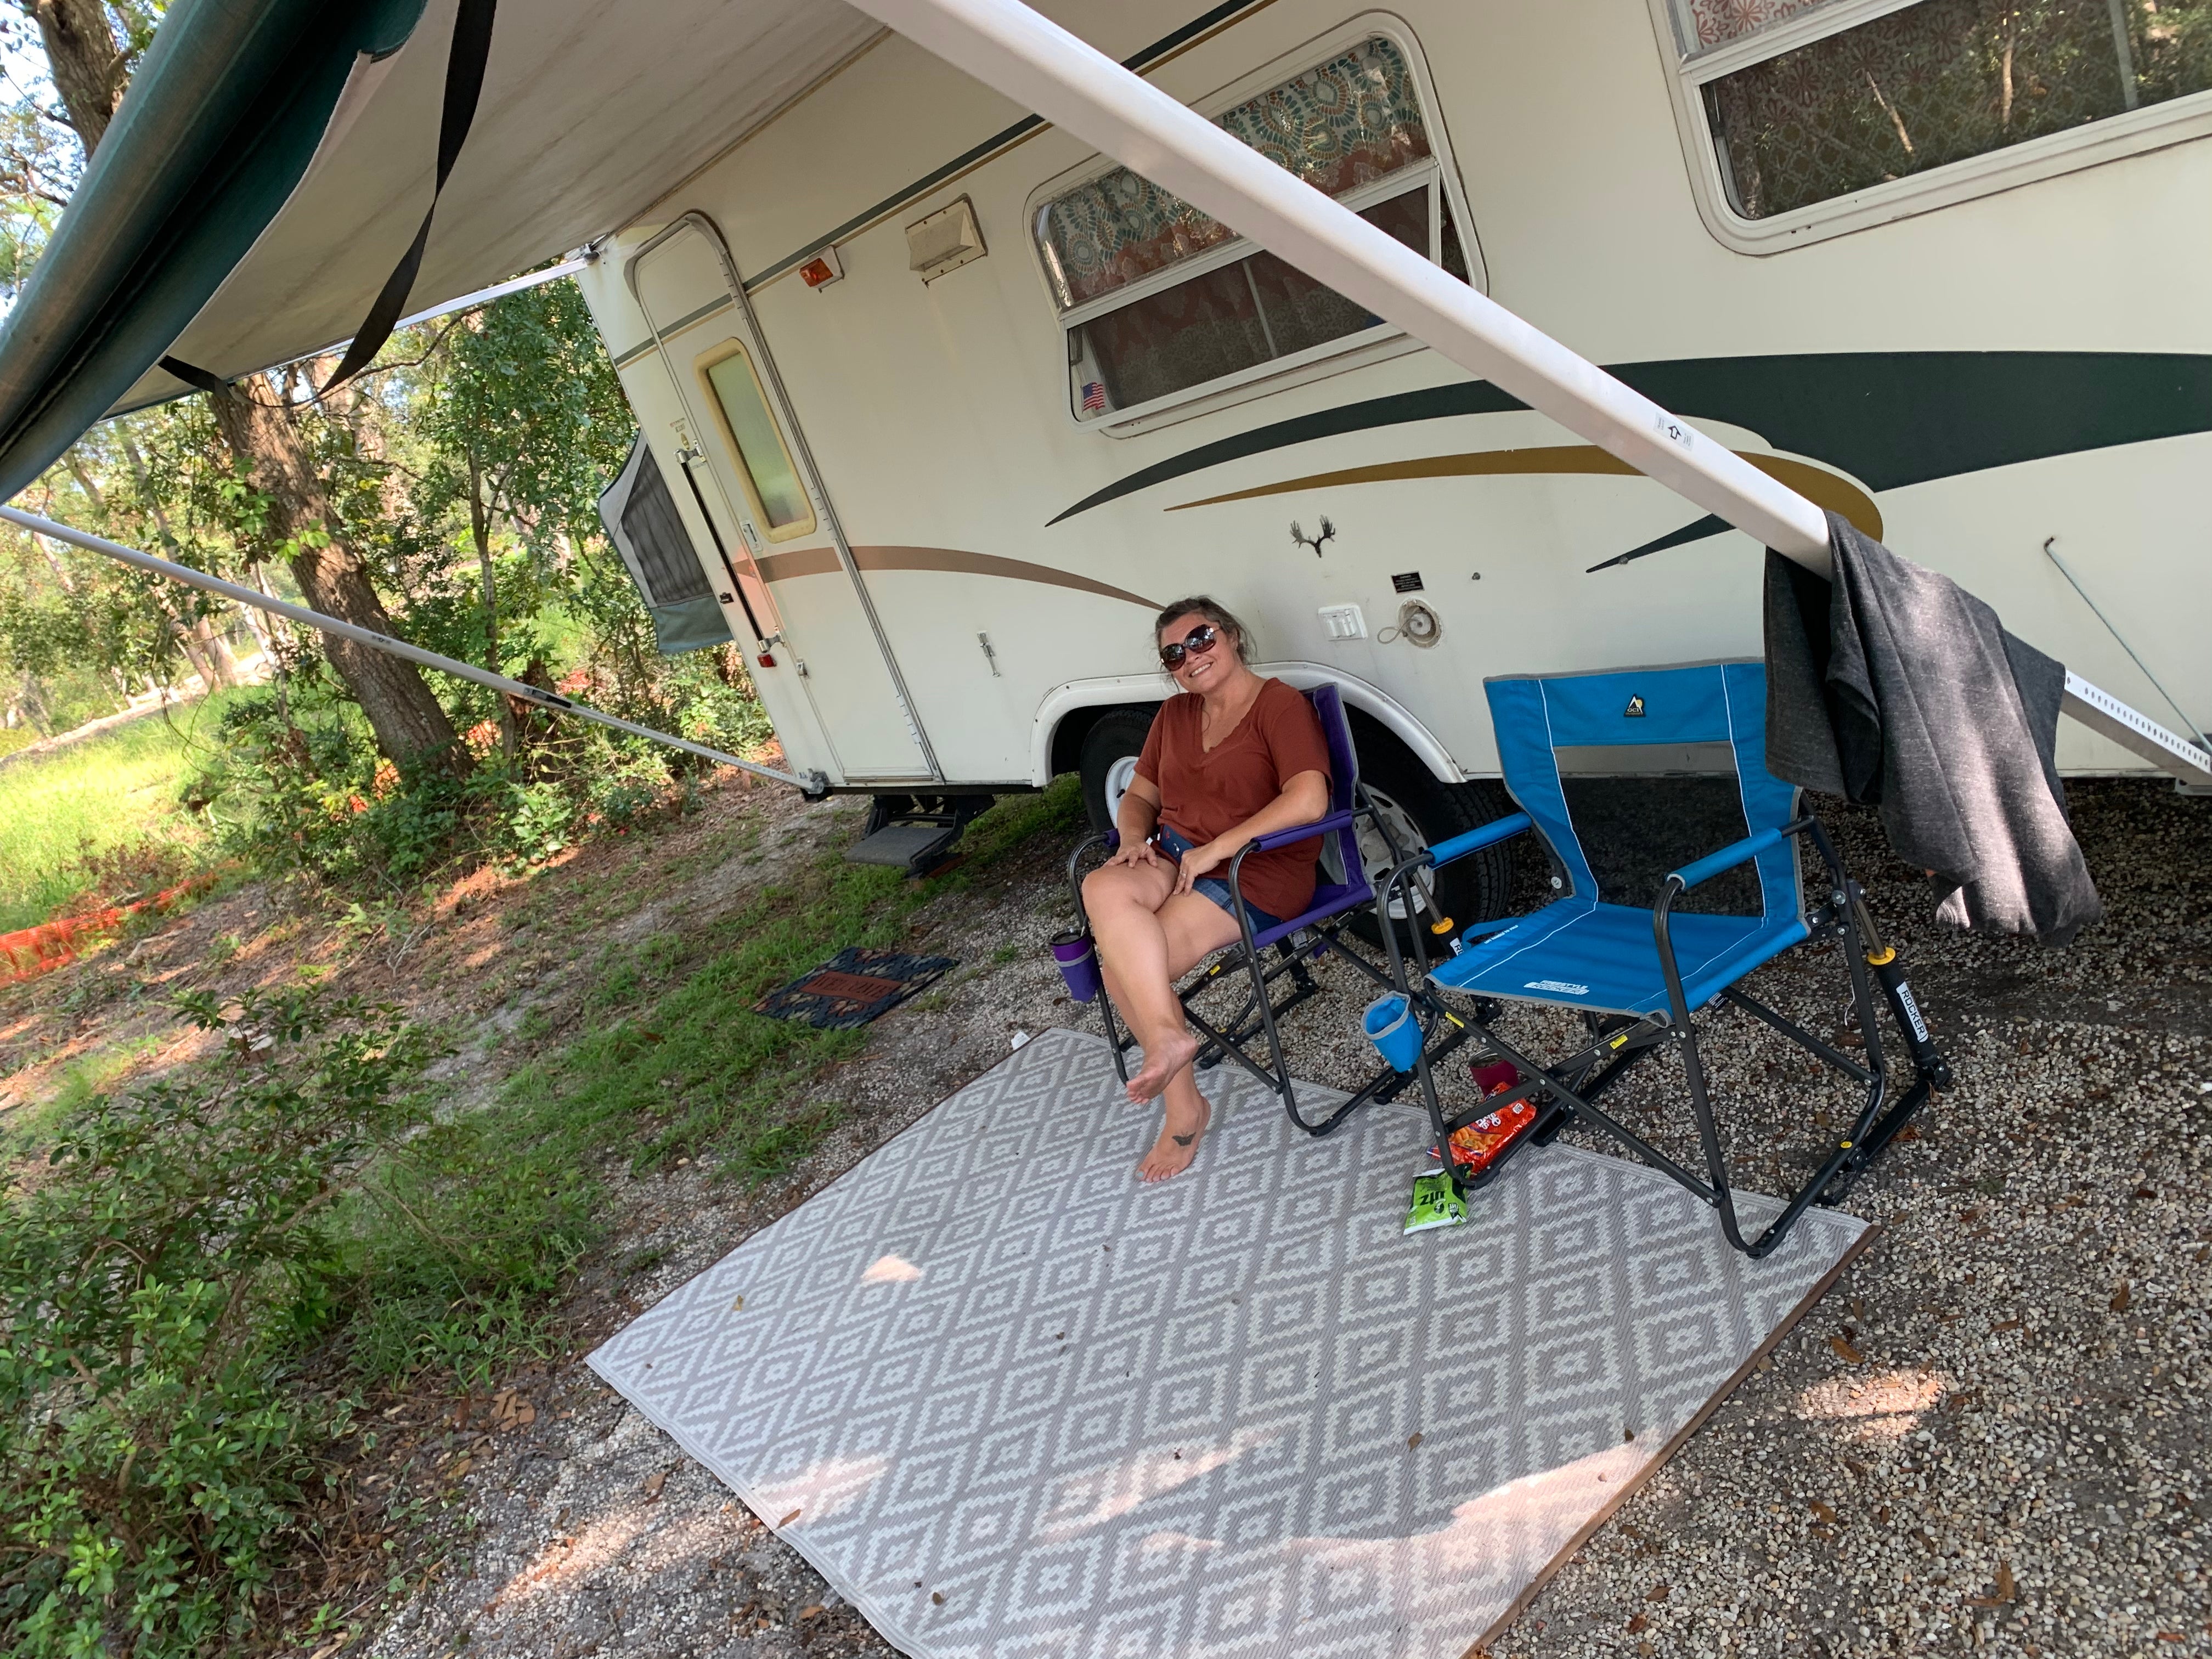 My beautiful wife relaxing outside of our camper!